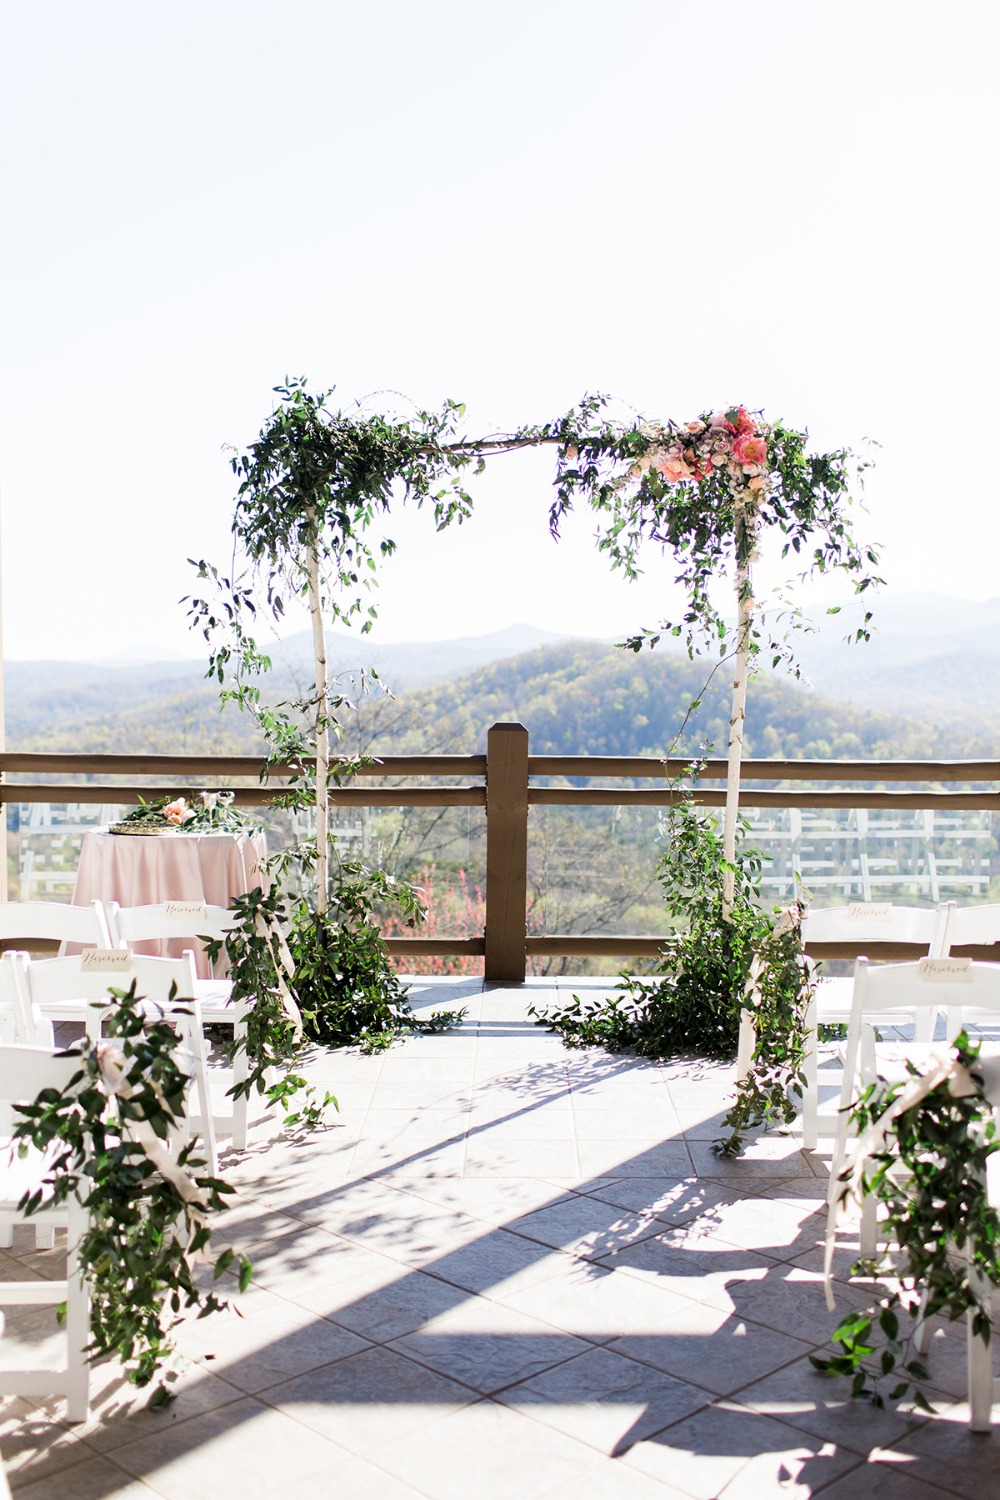 Birch wedding arbor with floral and leafy green details